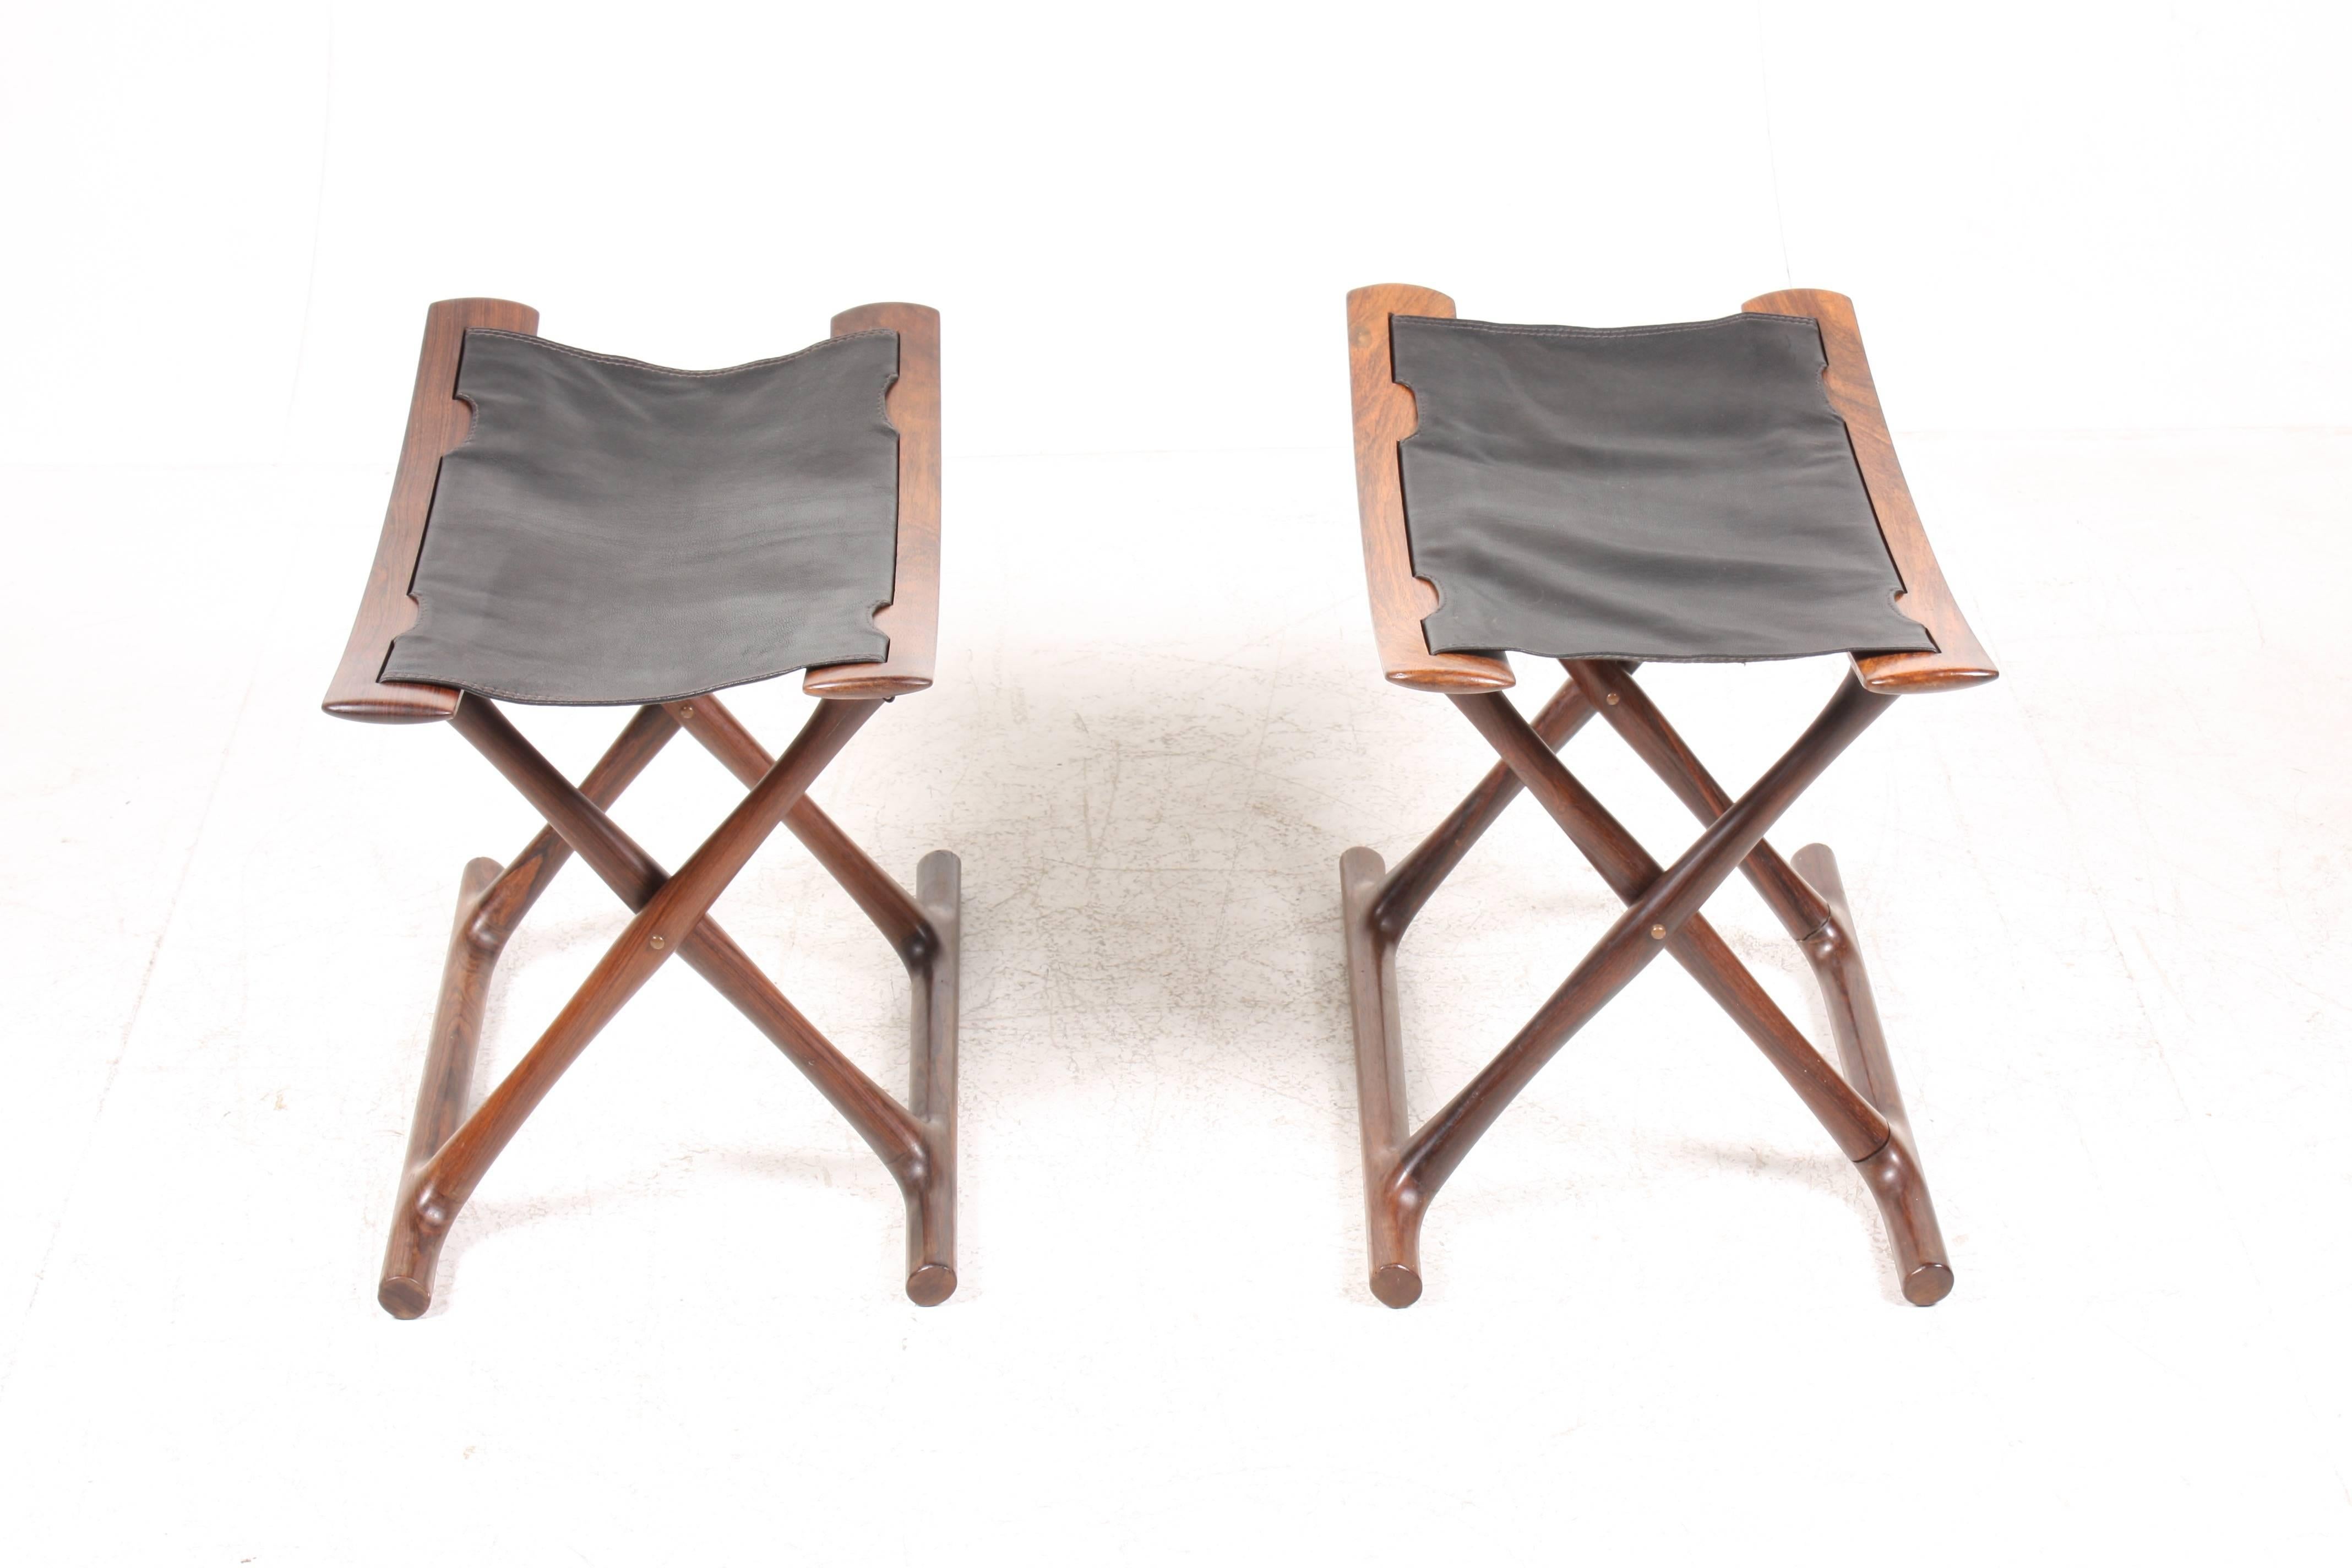 Mid-20th Century Pair of Rosewood Folding Stools Design by Ole Wanscher